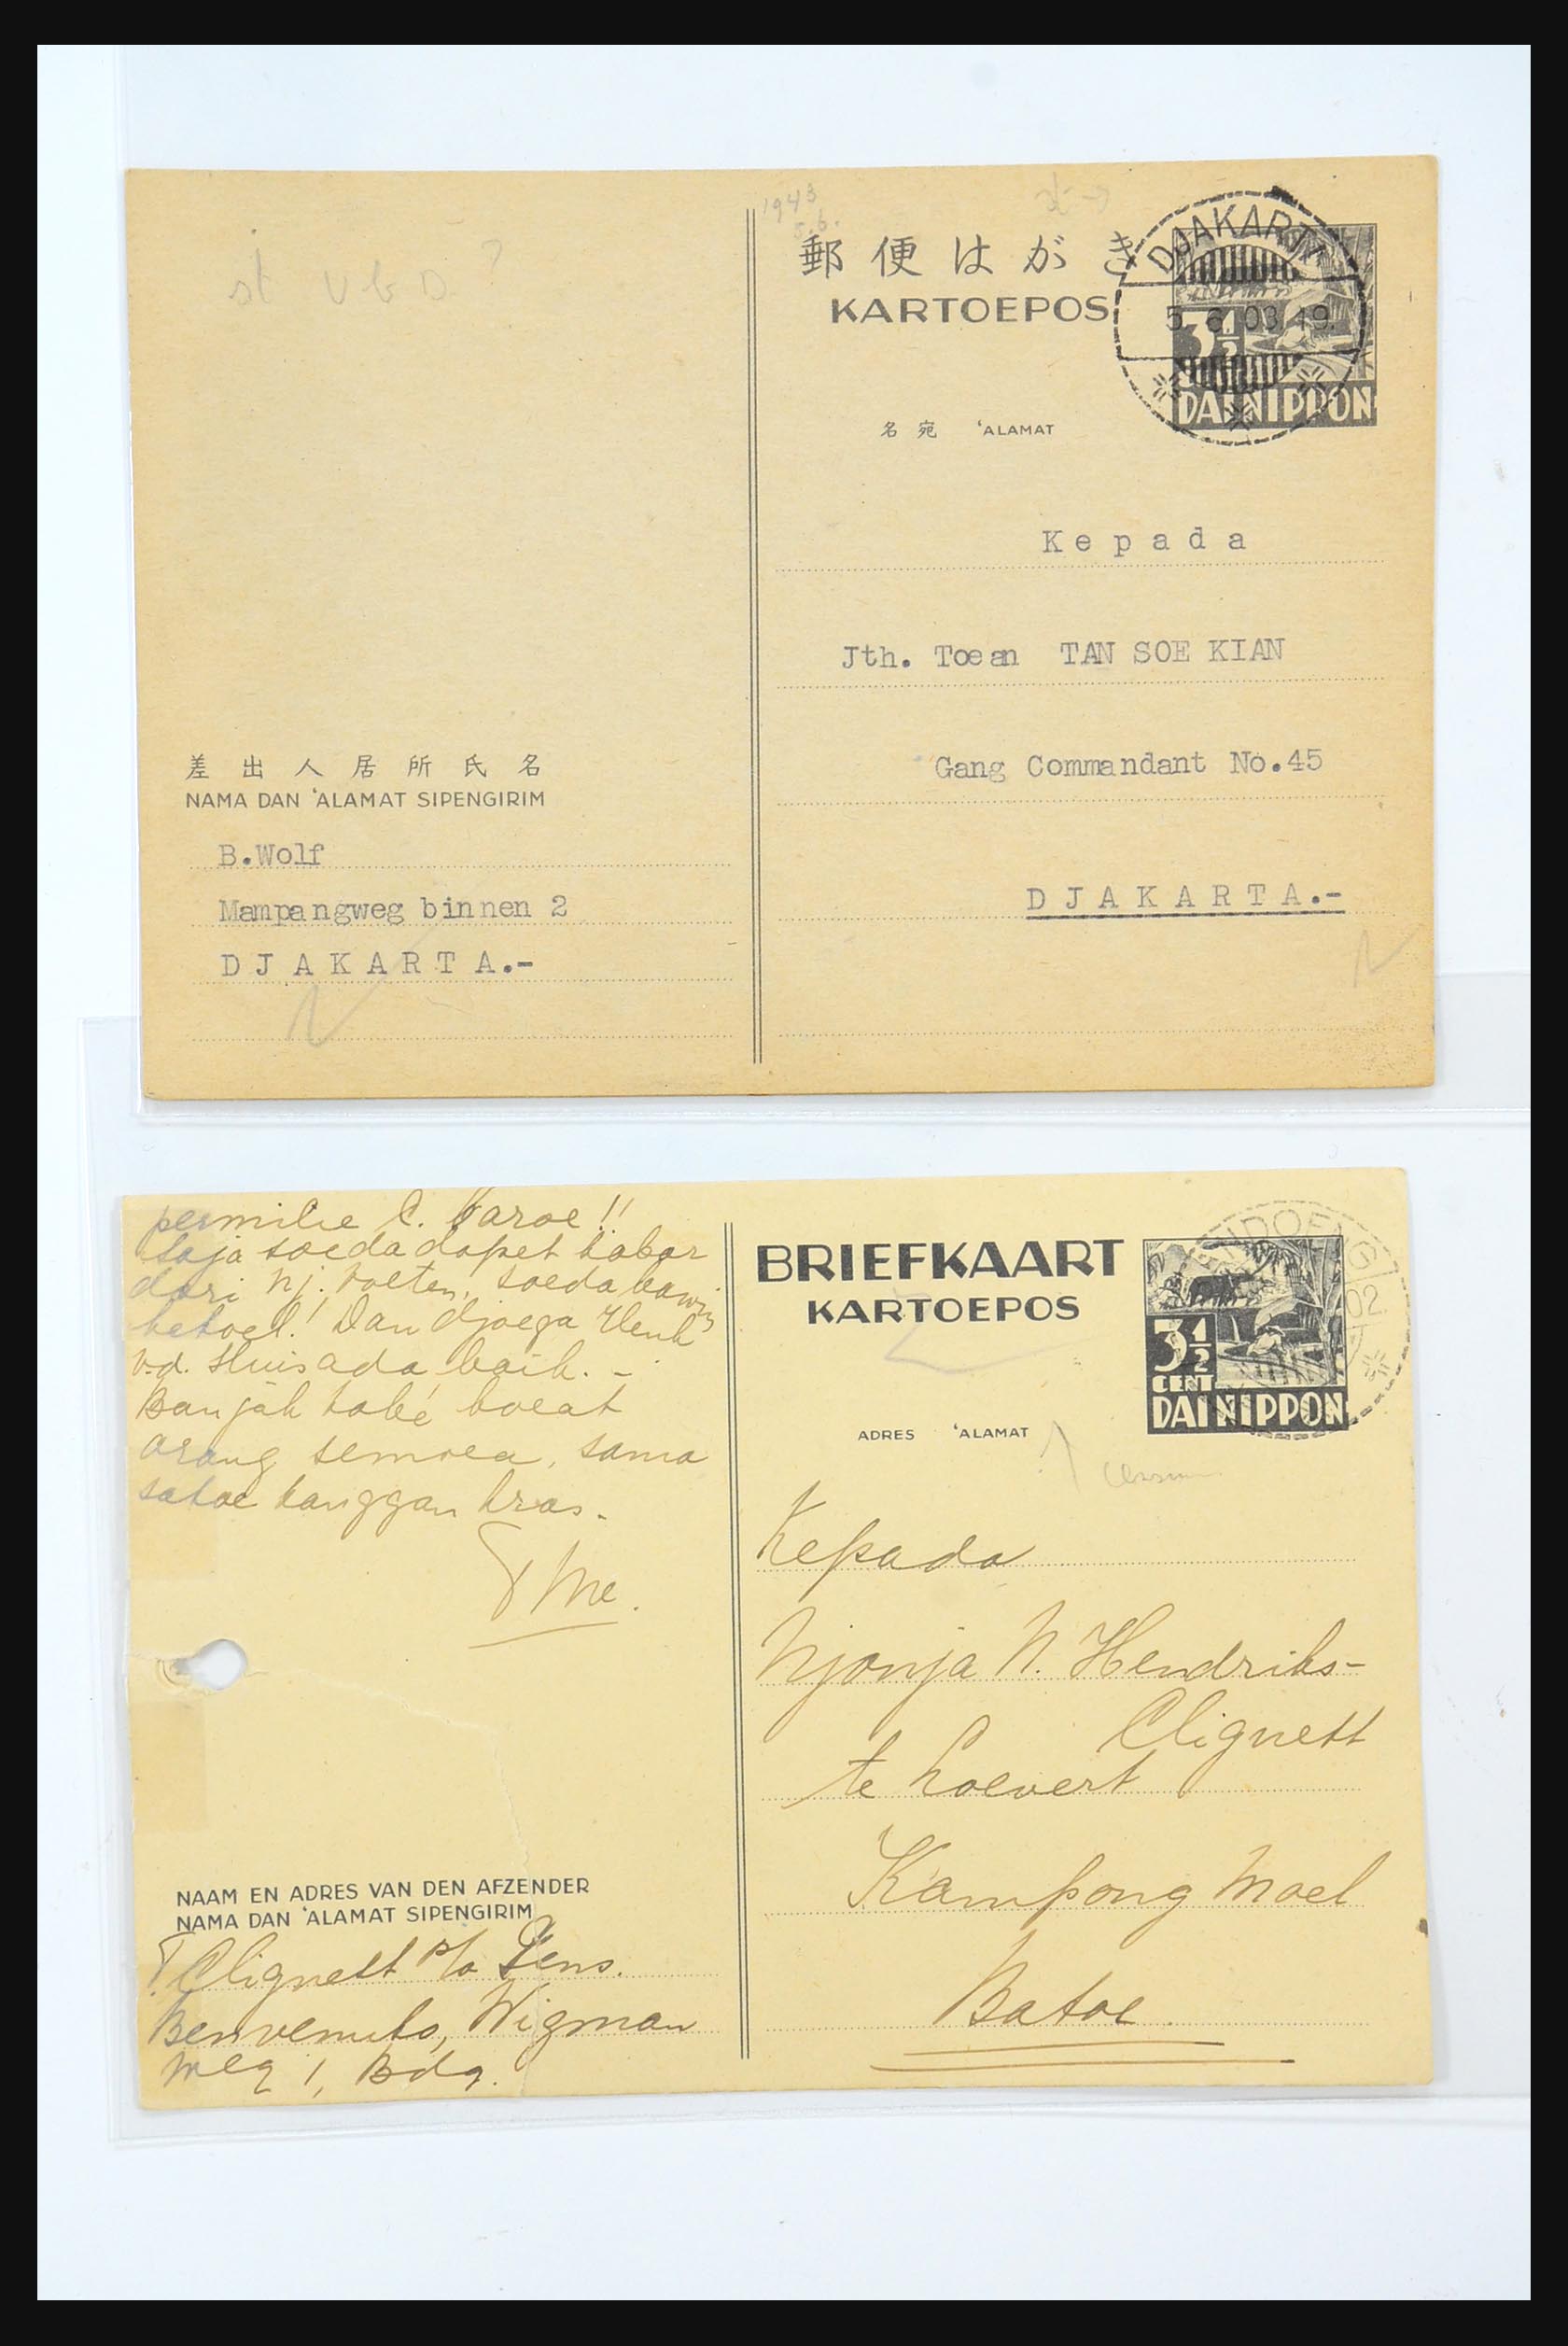 31362 095 - 31362 Netherlands Indies Japanese occupation covers 1942-1945.